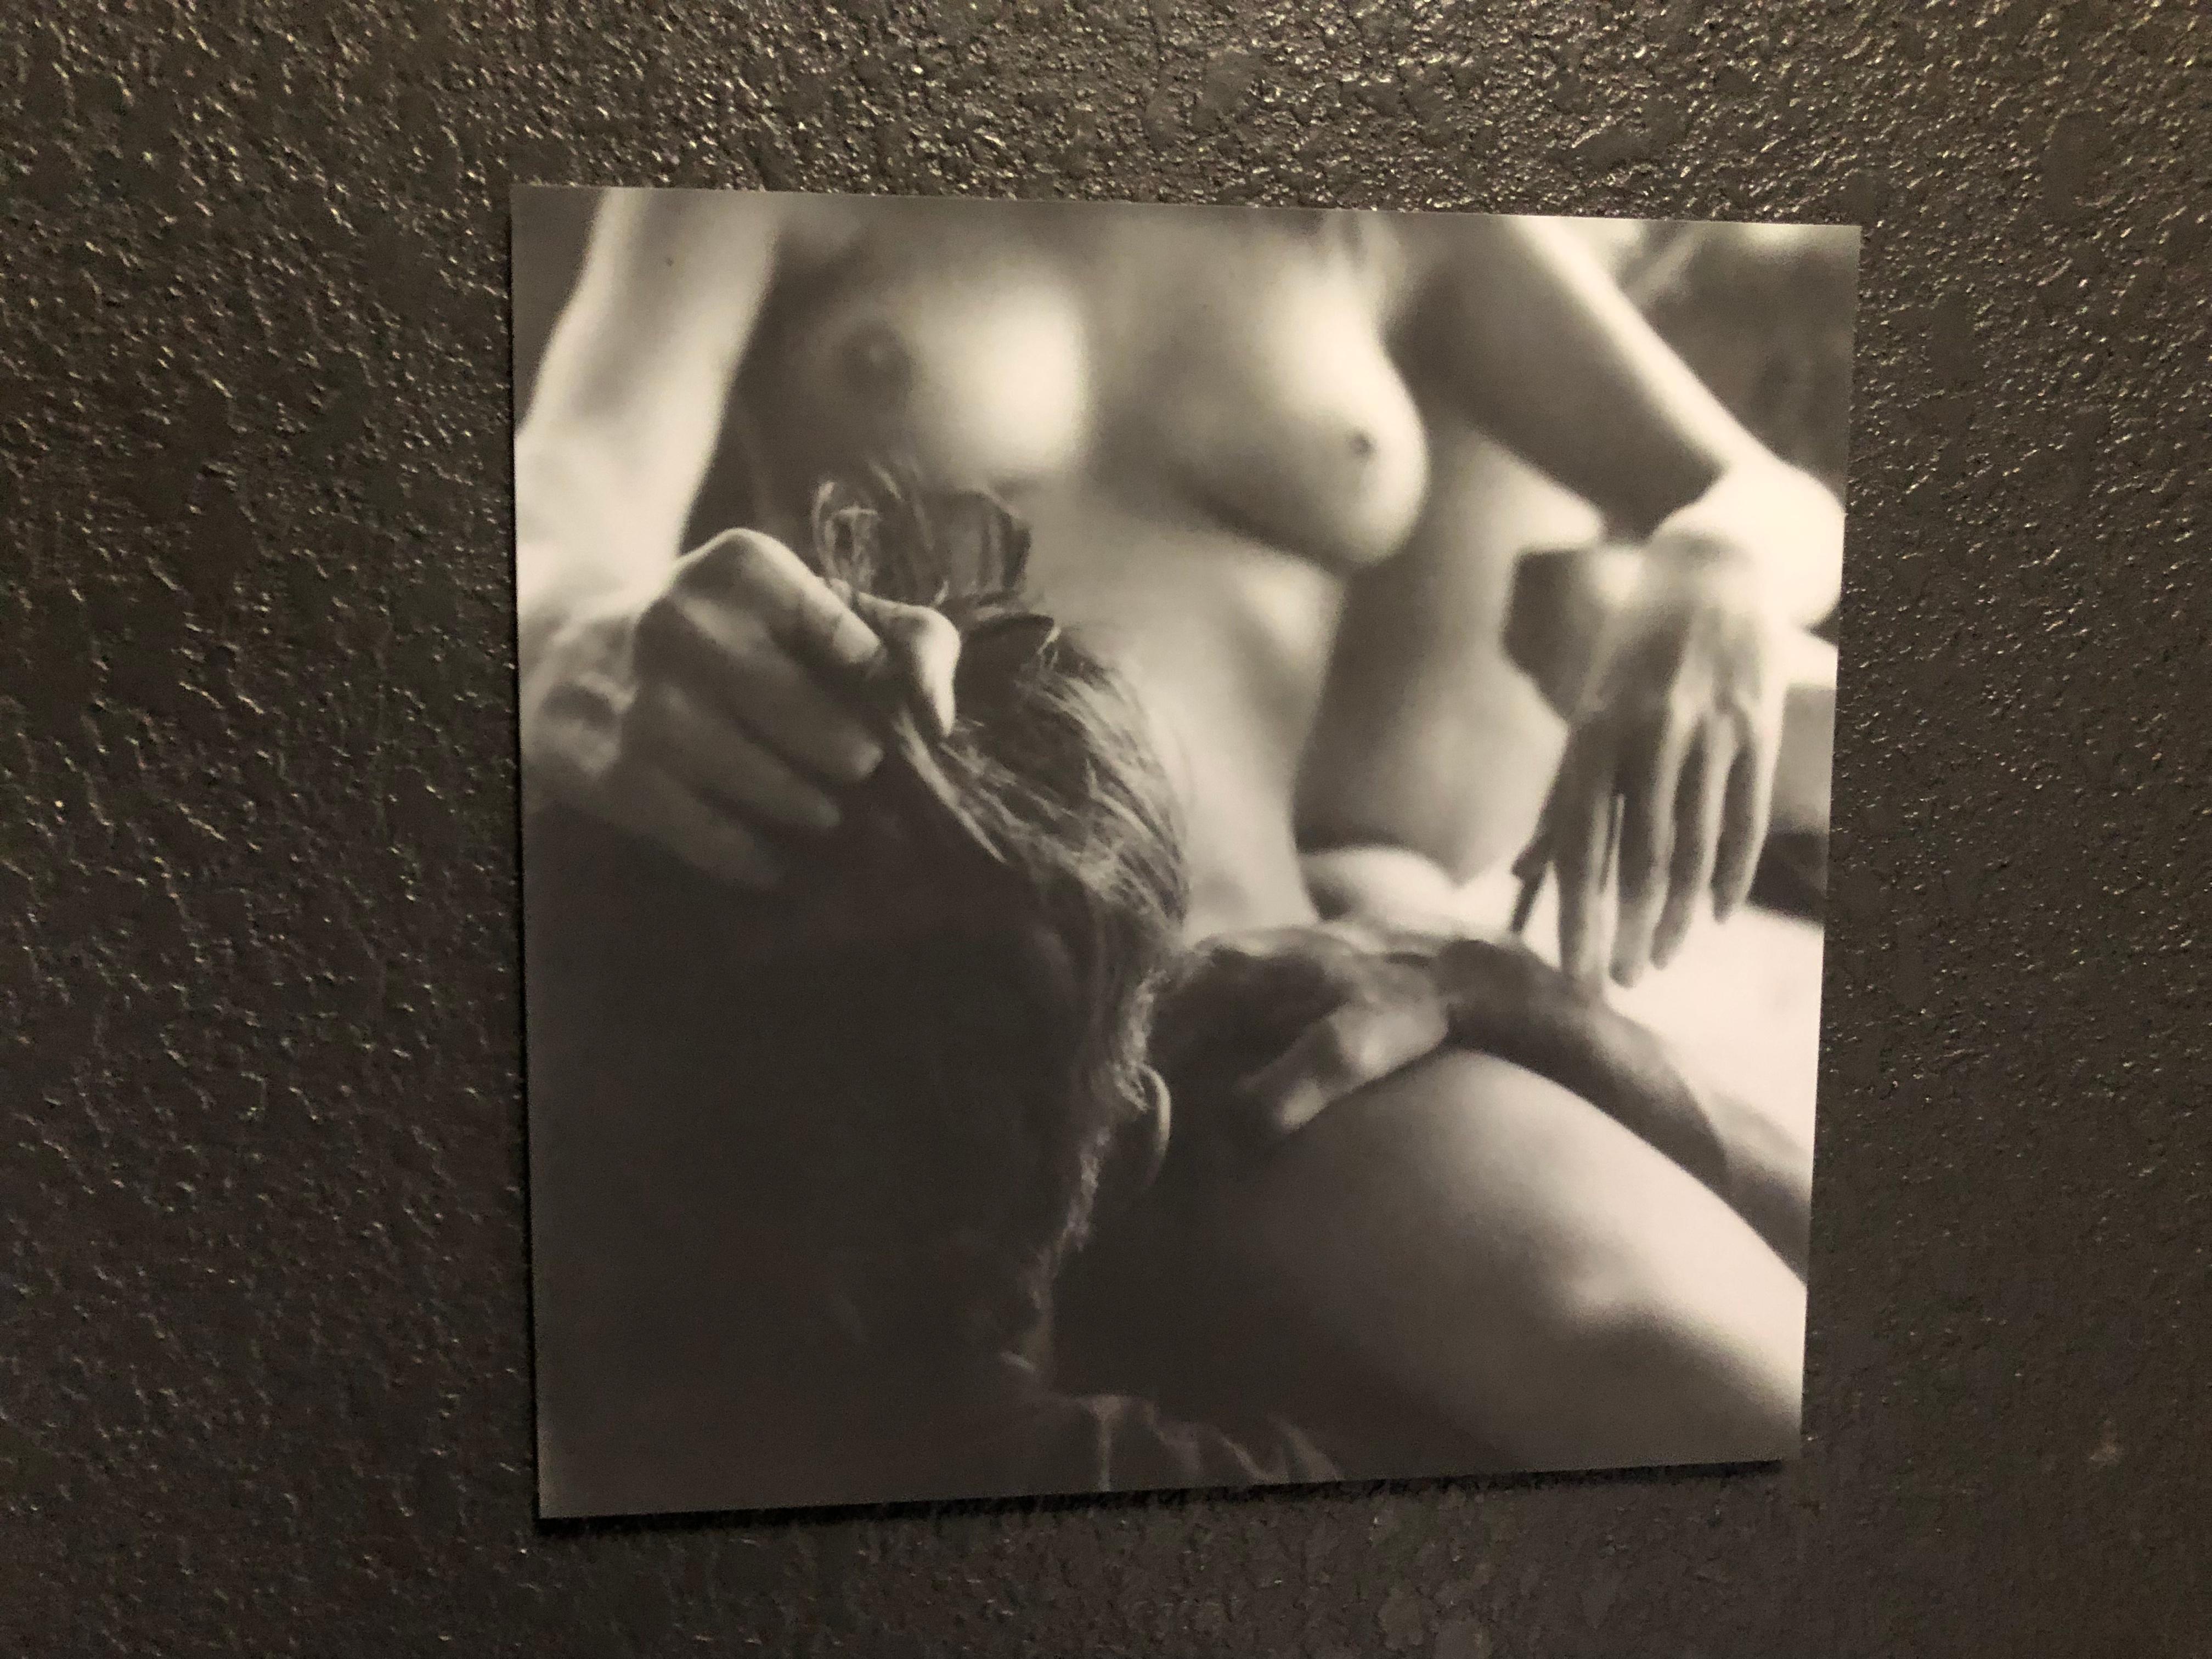 Melt with You - Contemporary, Nude, Women, Polaroid, 21st Century, Color - Black Black and White Photograph by Kirsten Thys van den Audenaerde